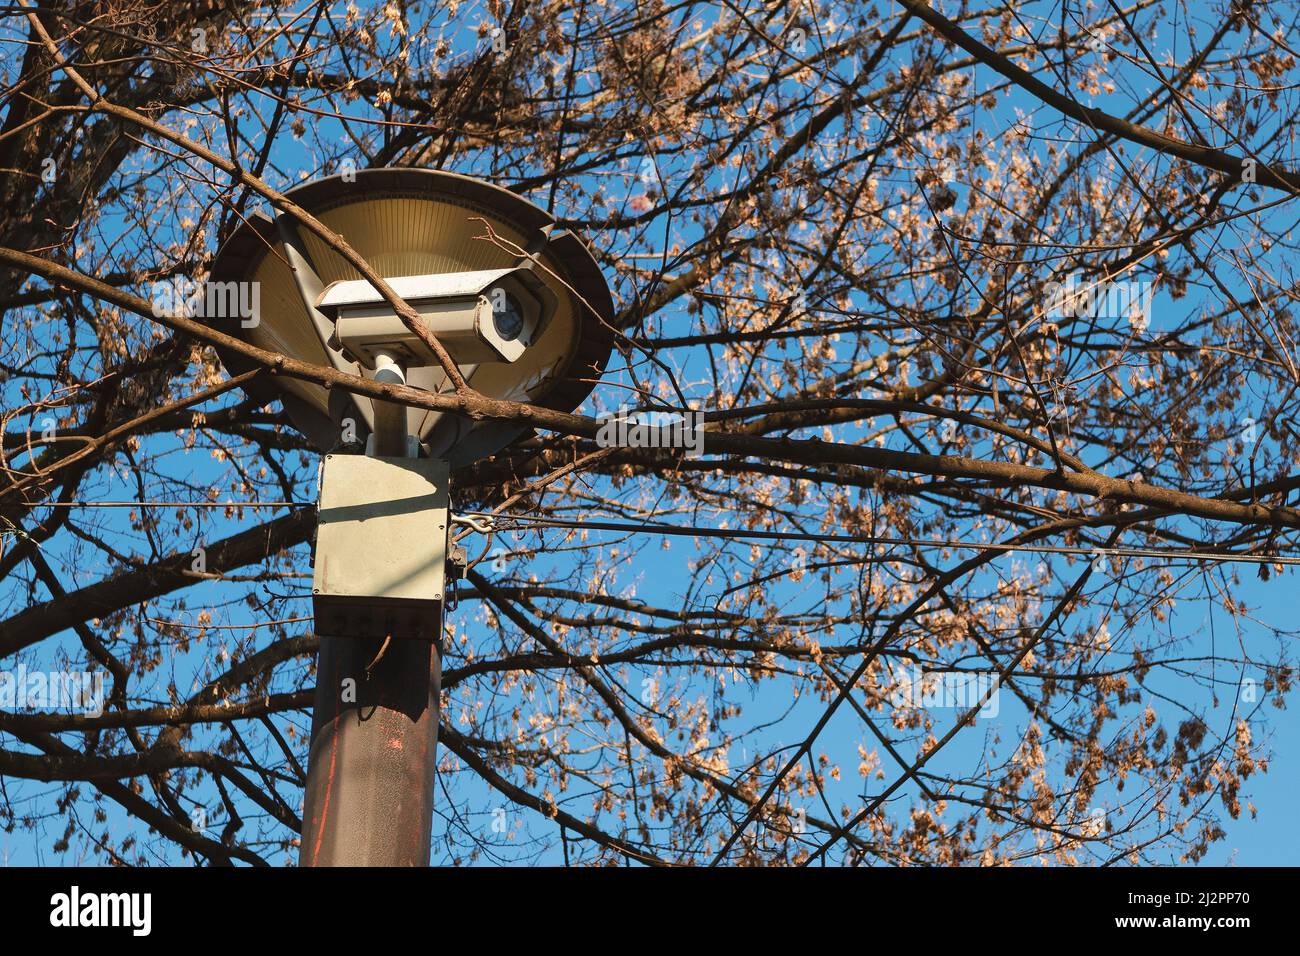 Detail of a camera hidden in a tree canopy, detail from a city park. Stock Photo